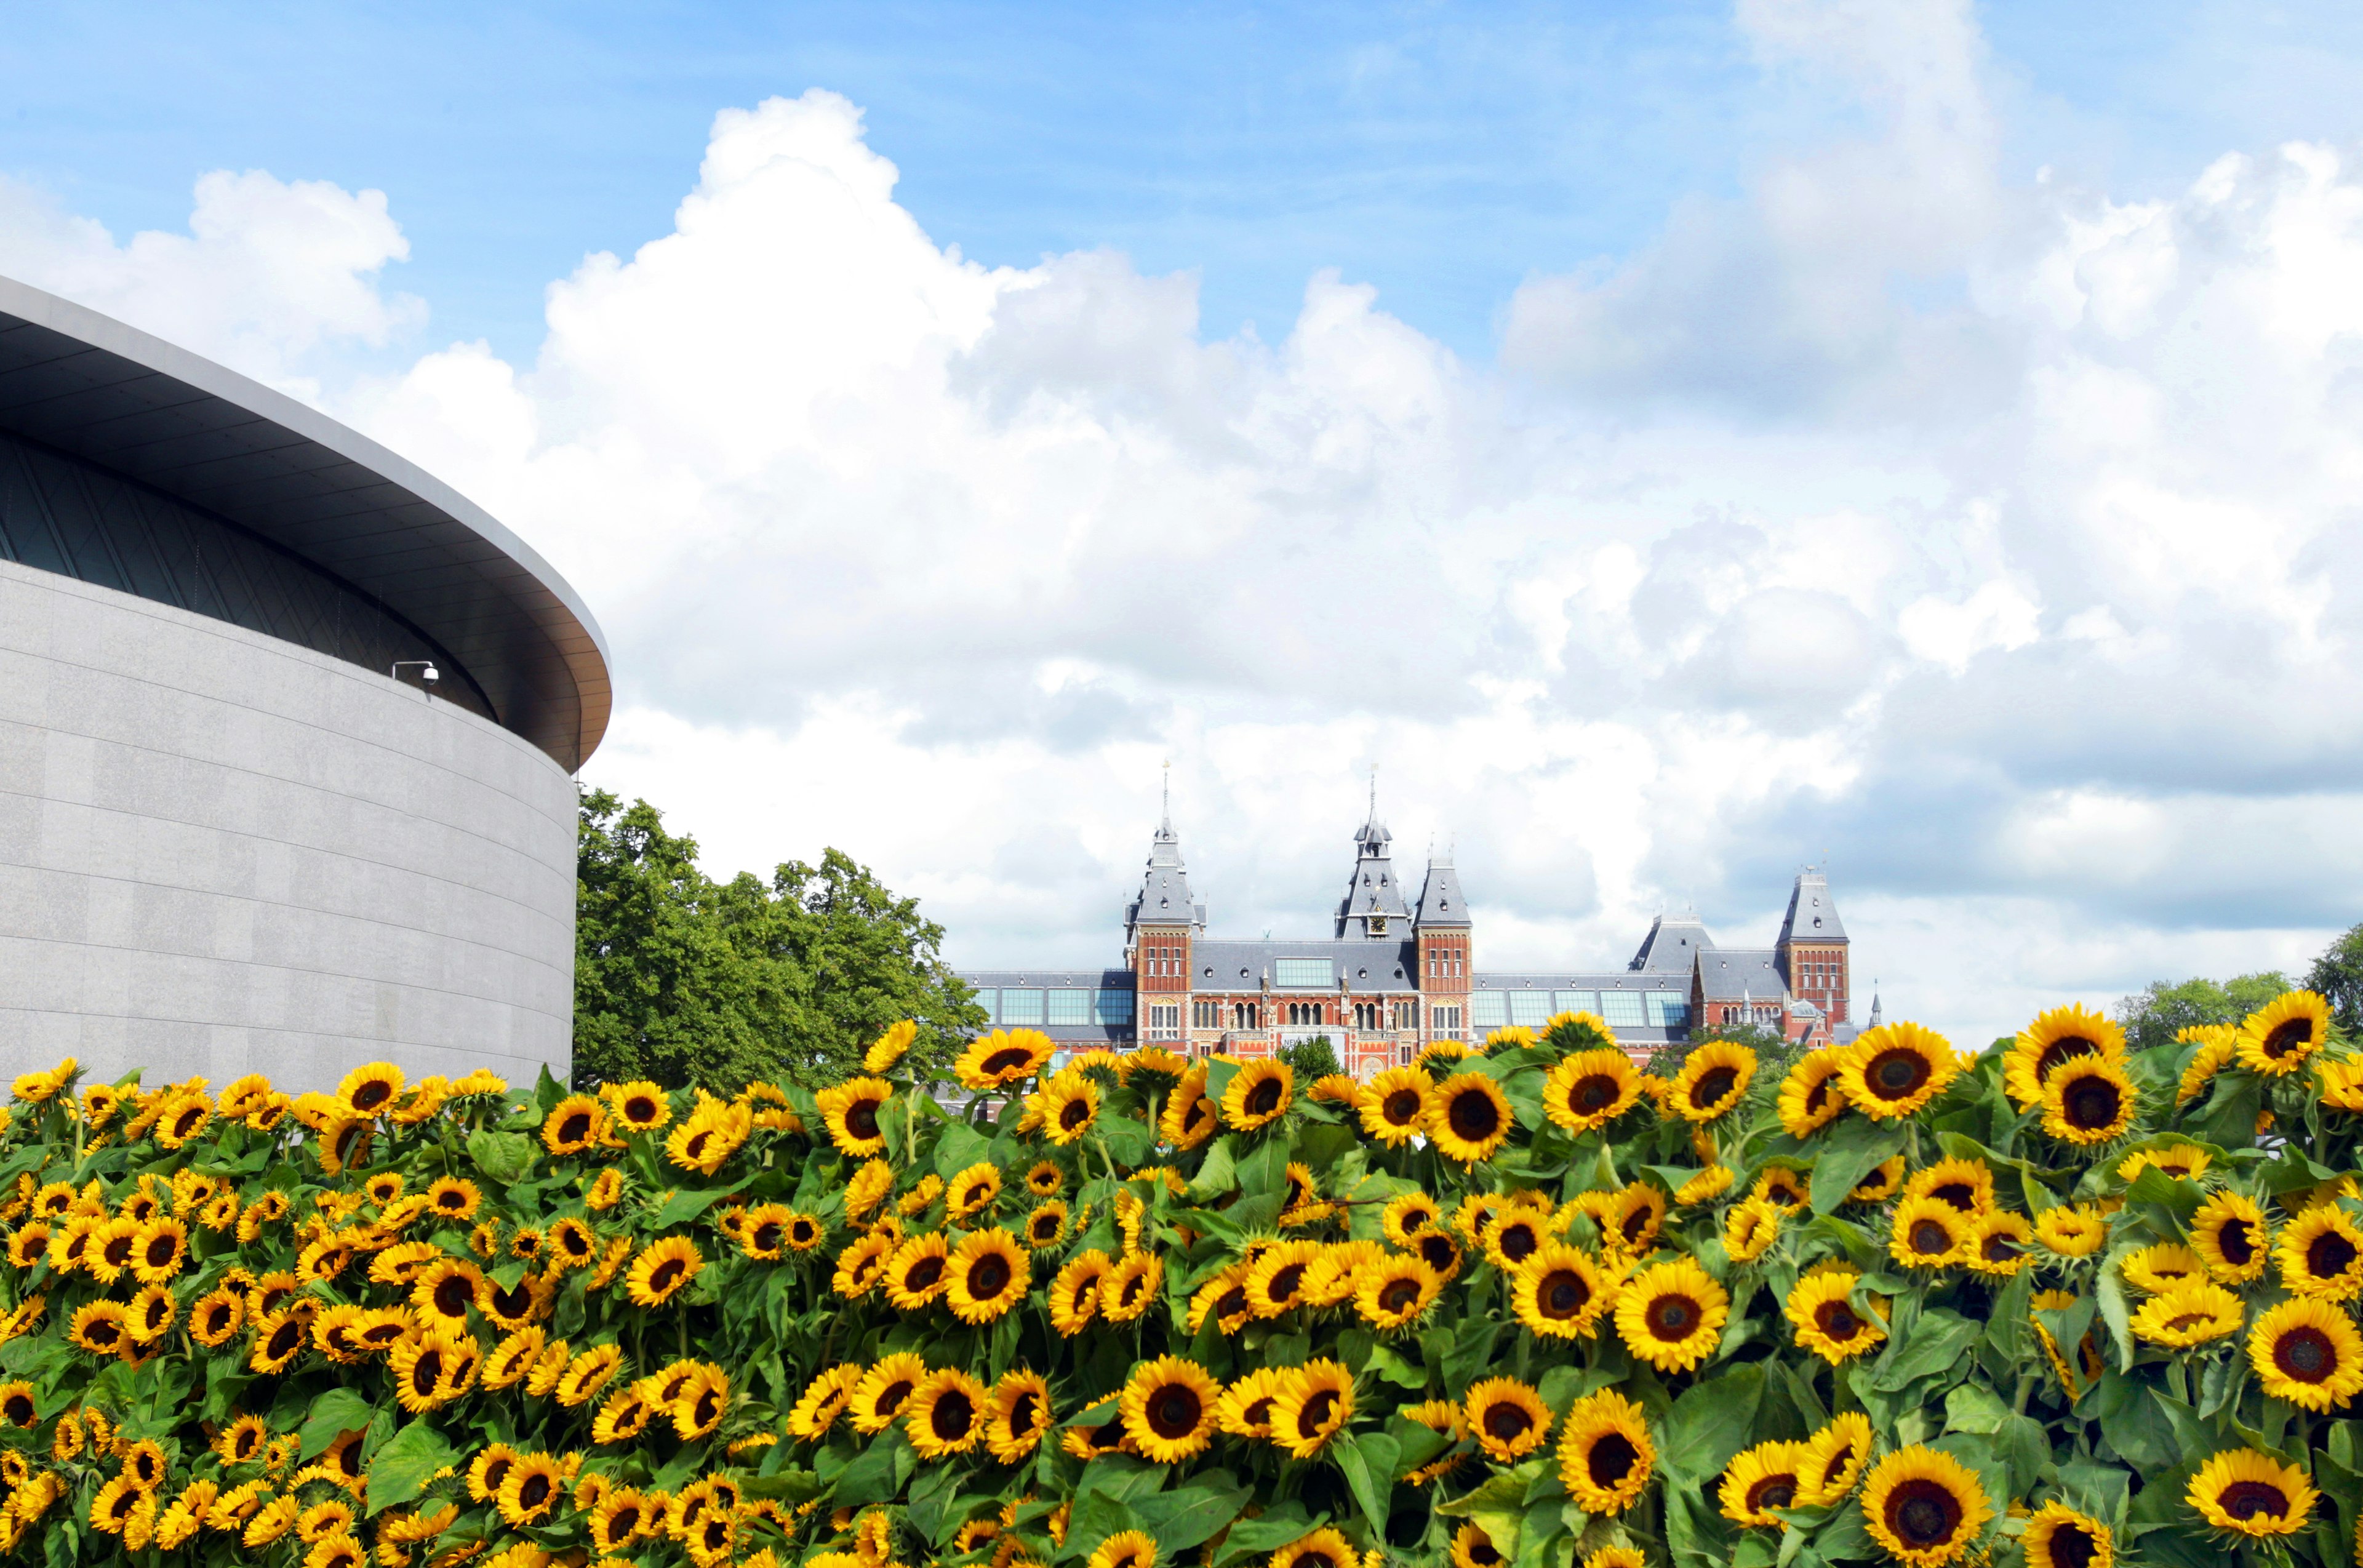 Sunflowers with Van Gogh Museum, left and Rijksmuseum in beckground at Museum squere in Amsterdam,Netherlands.